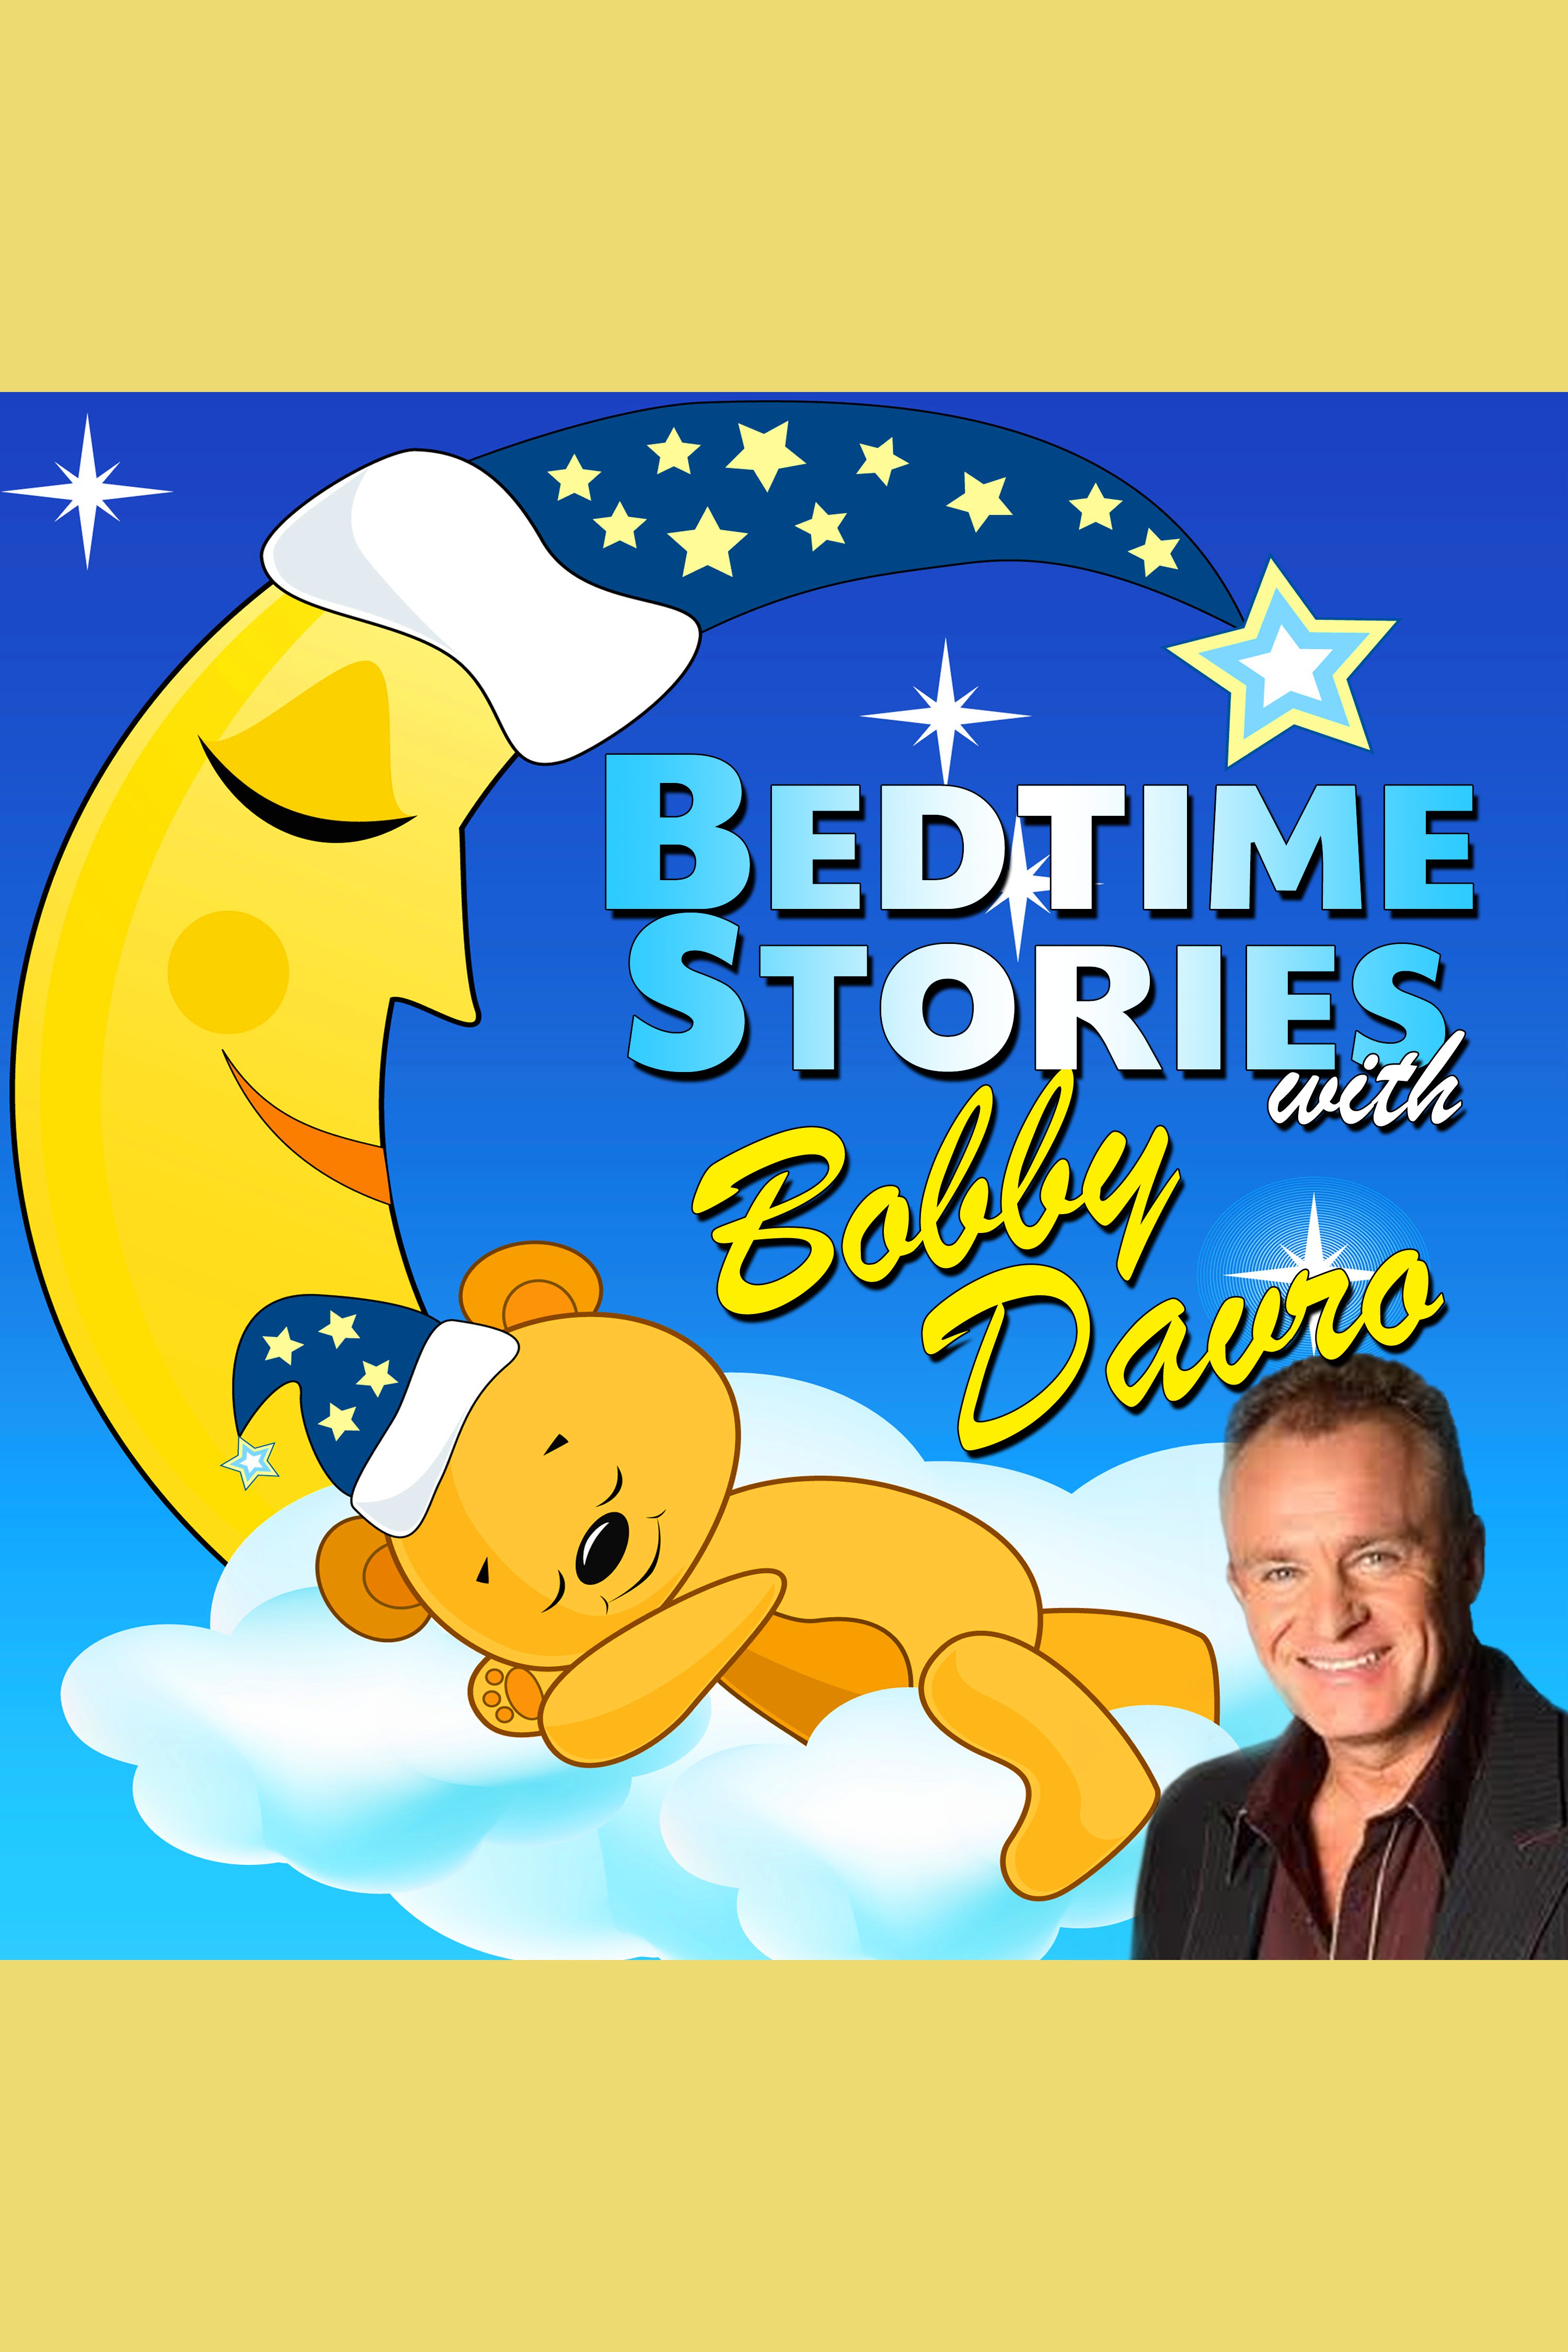 Bedtime Stories with Bobby Davro cover image